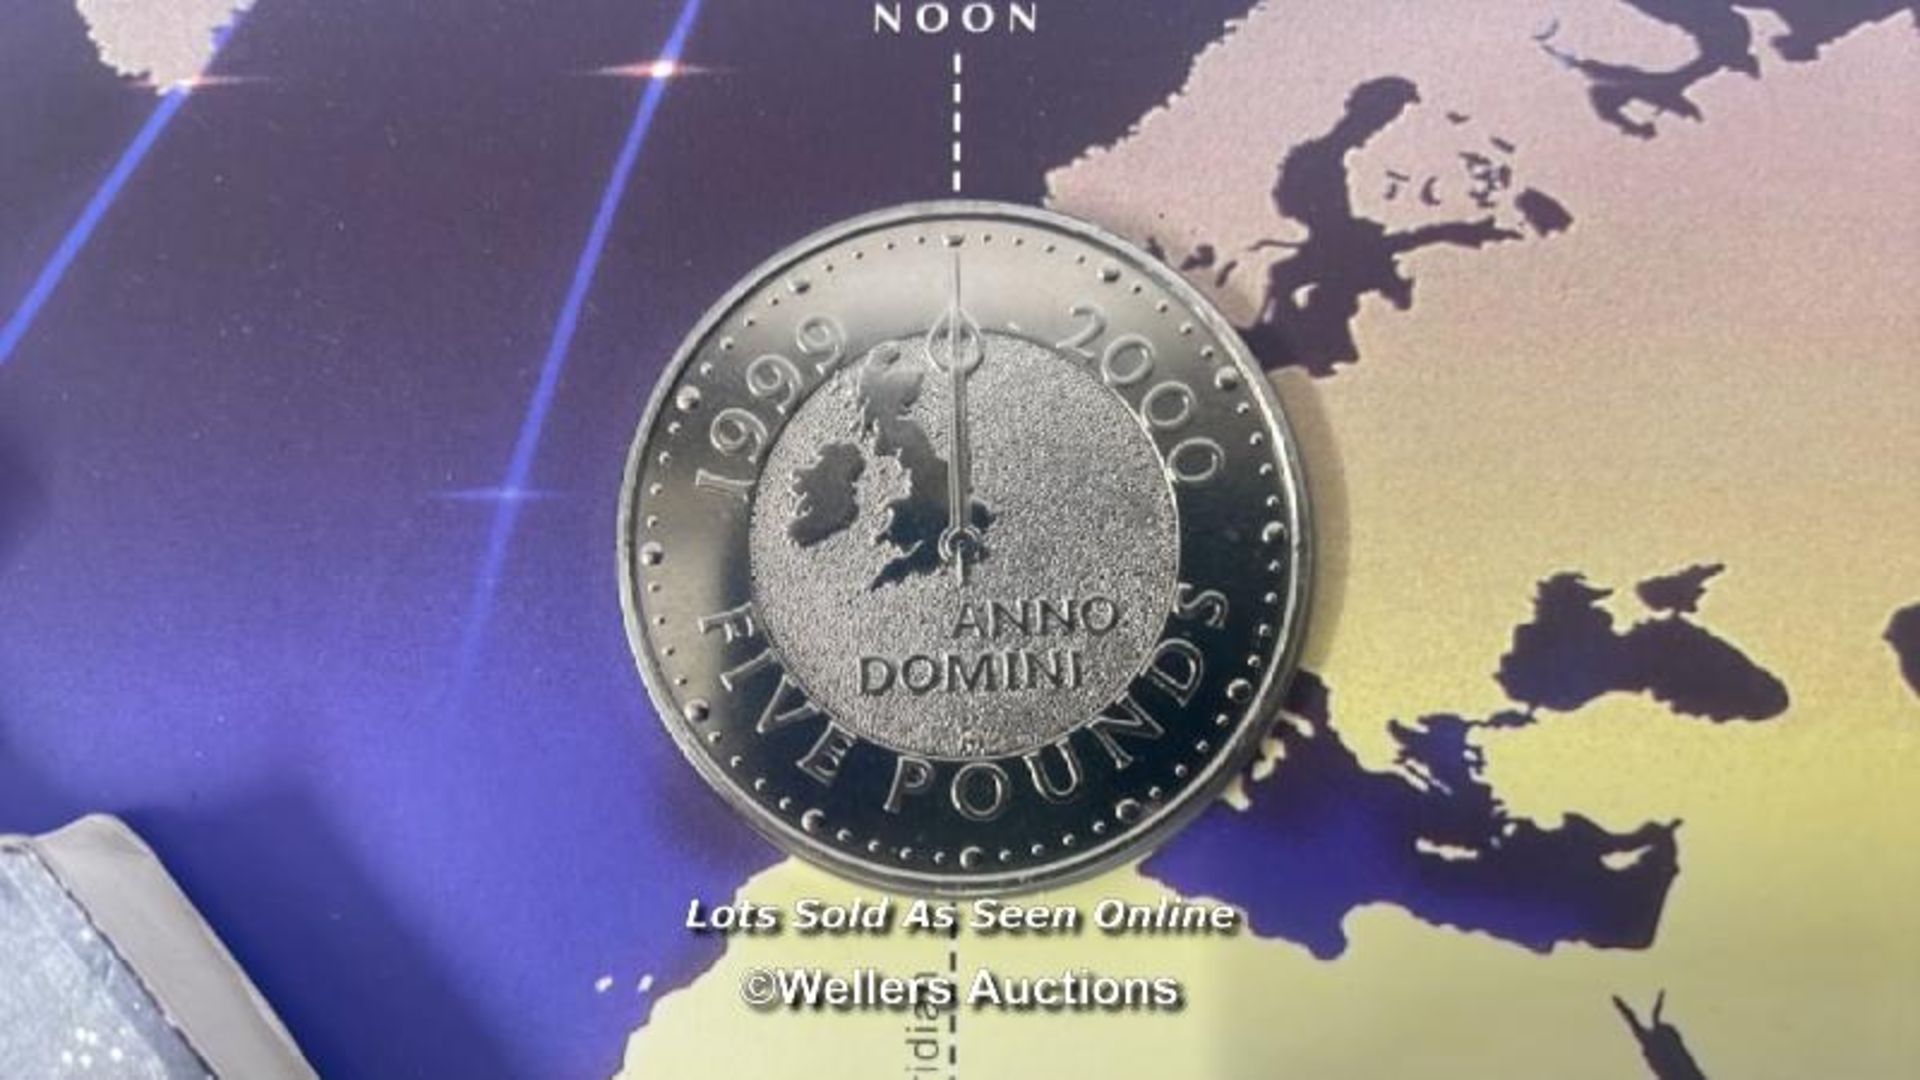 THE ROYAL MINT TITANIC SILVER PROOF £5 COIN NO.0642 AND ROYAL MINT MILLENIUM £5 COIN - Image 7 of 8